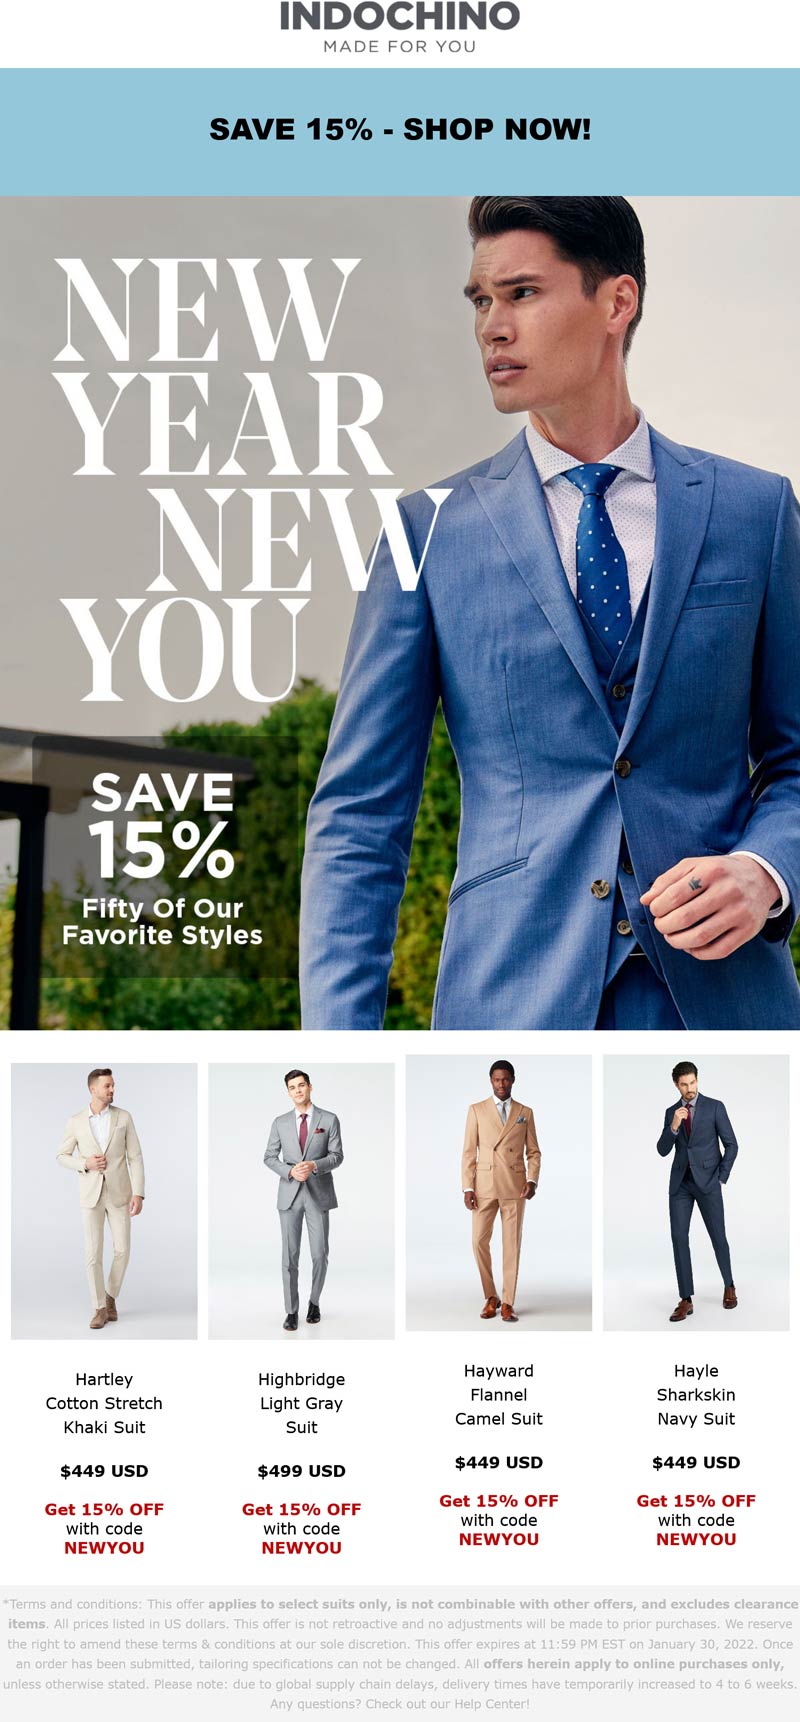 Indochino stores Coupon  15% off 50 suits at Indochino via promo code NEWYOU #indochino 